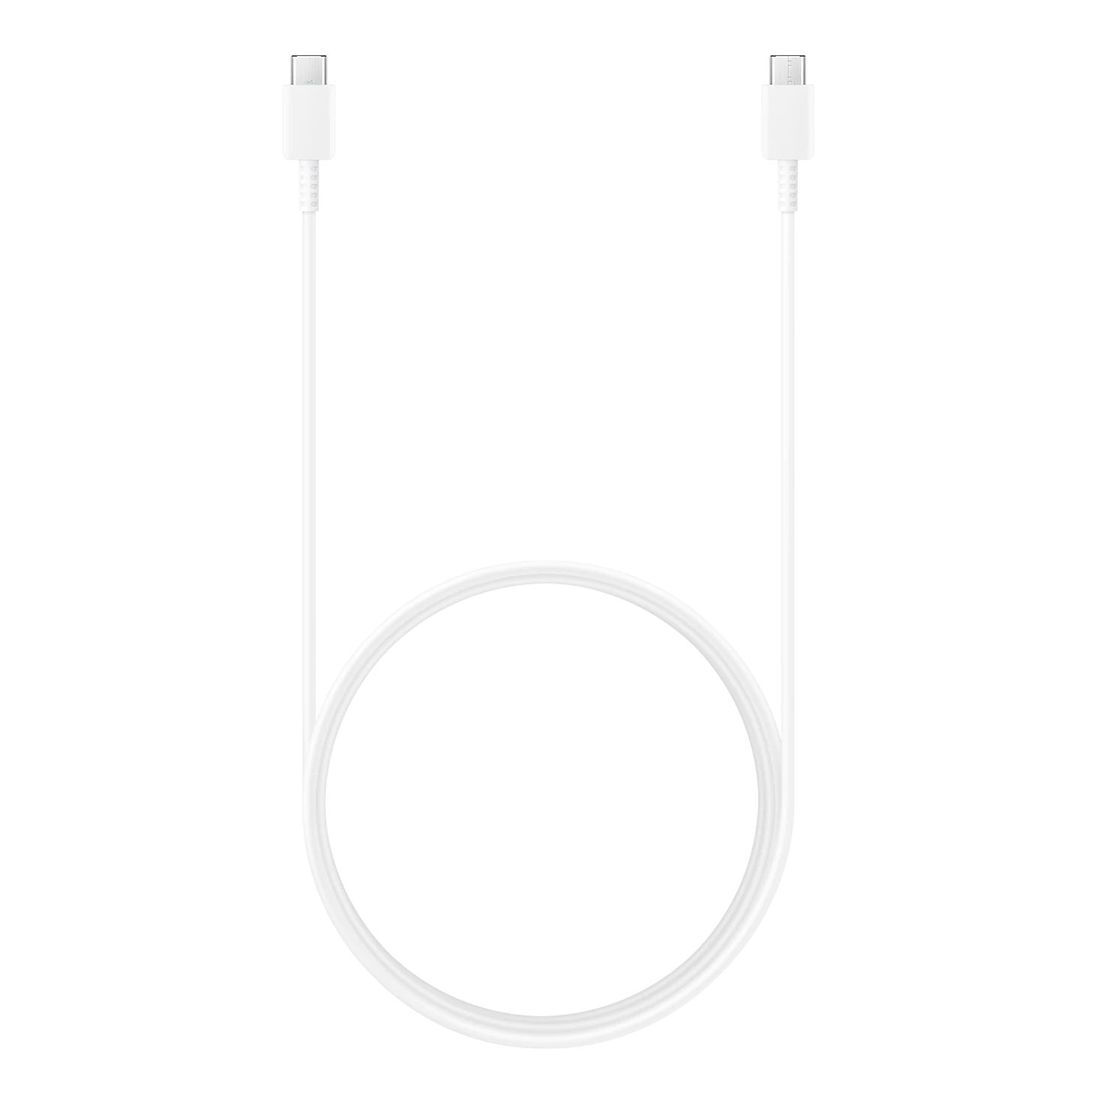 Samsung 3A USB-C to USB-C Cable 1.8m - White